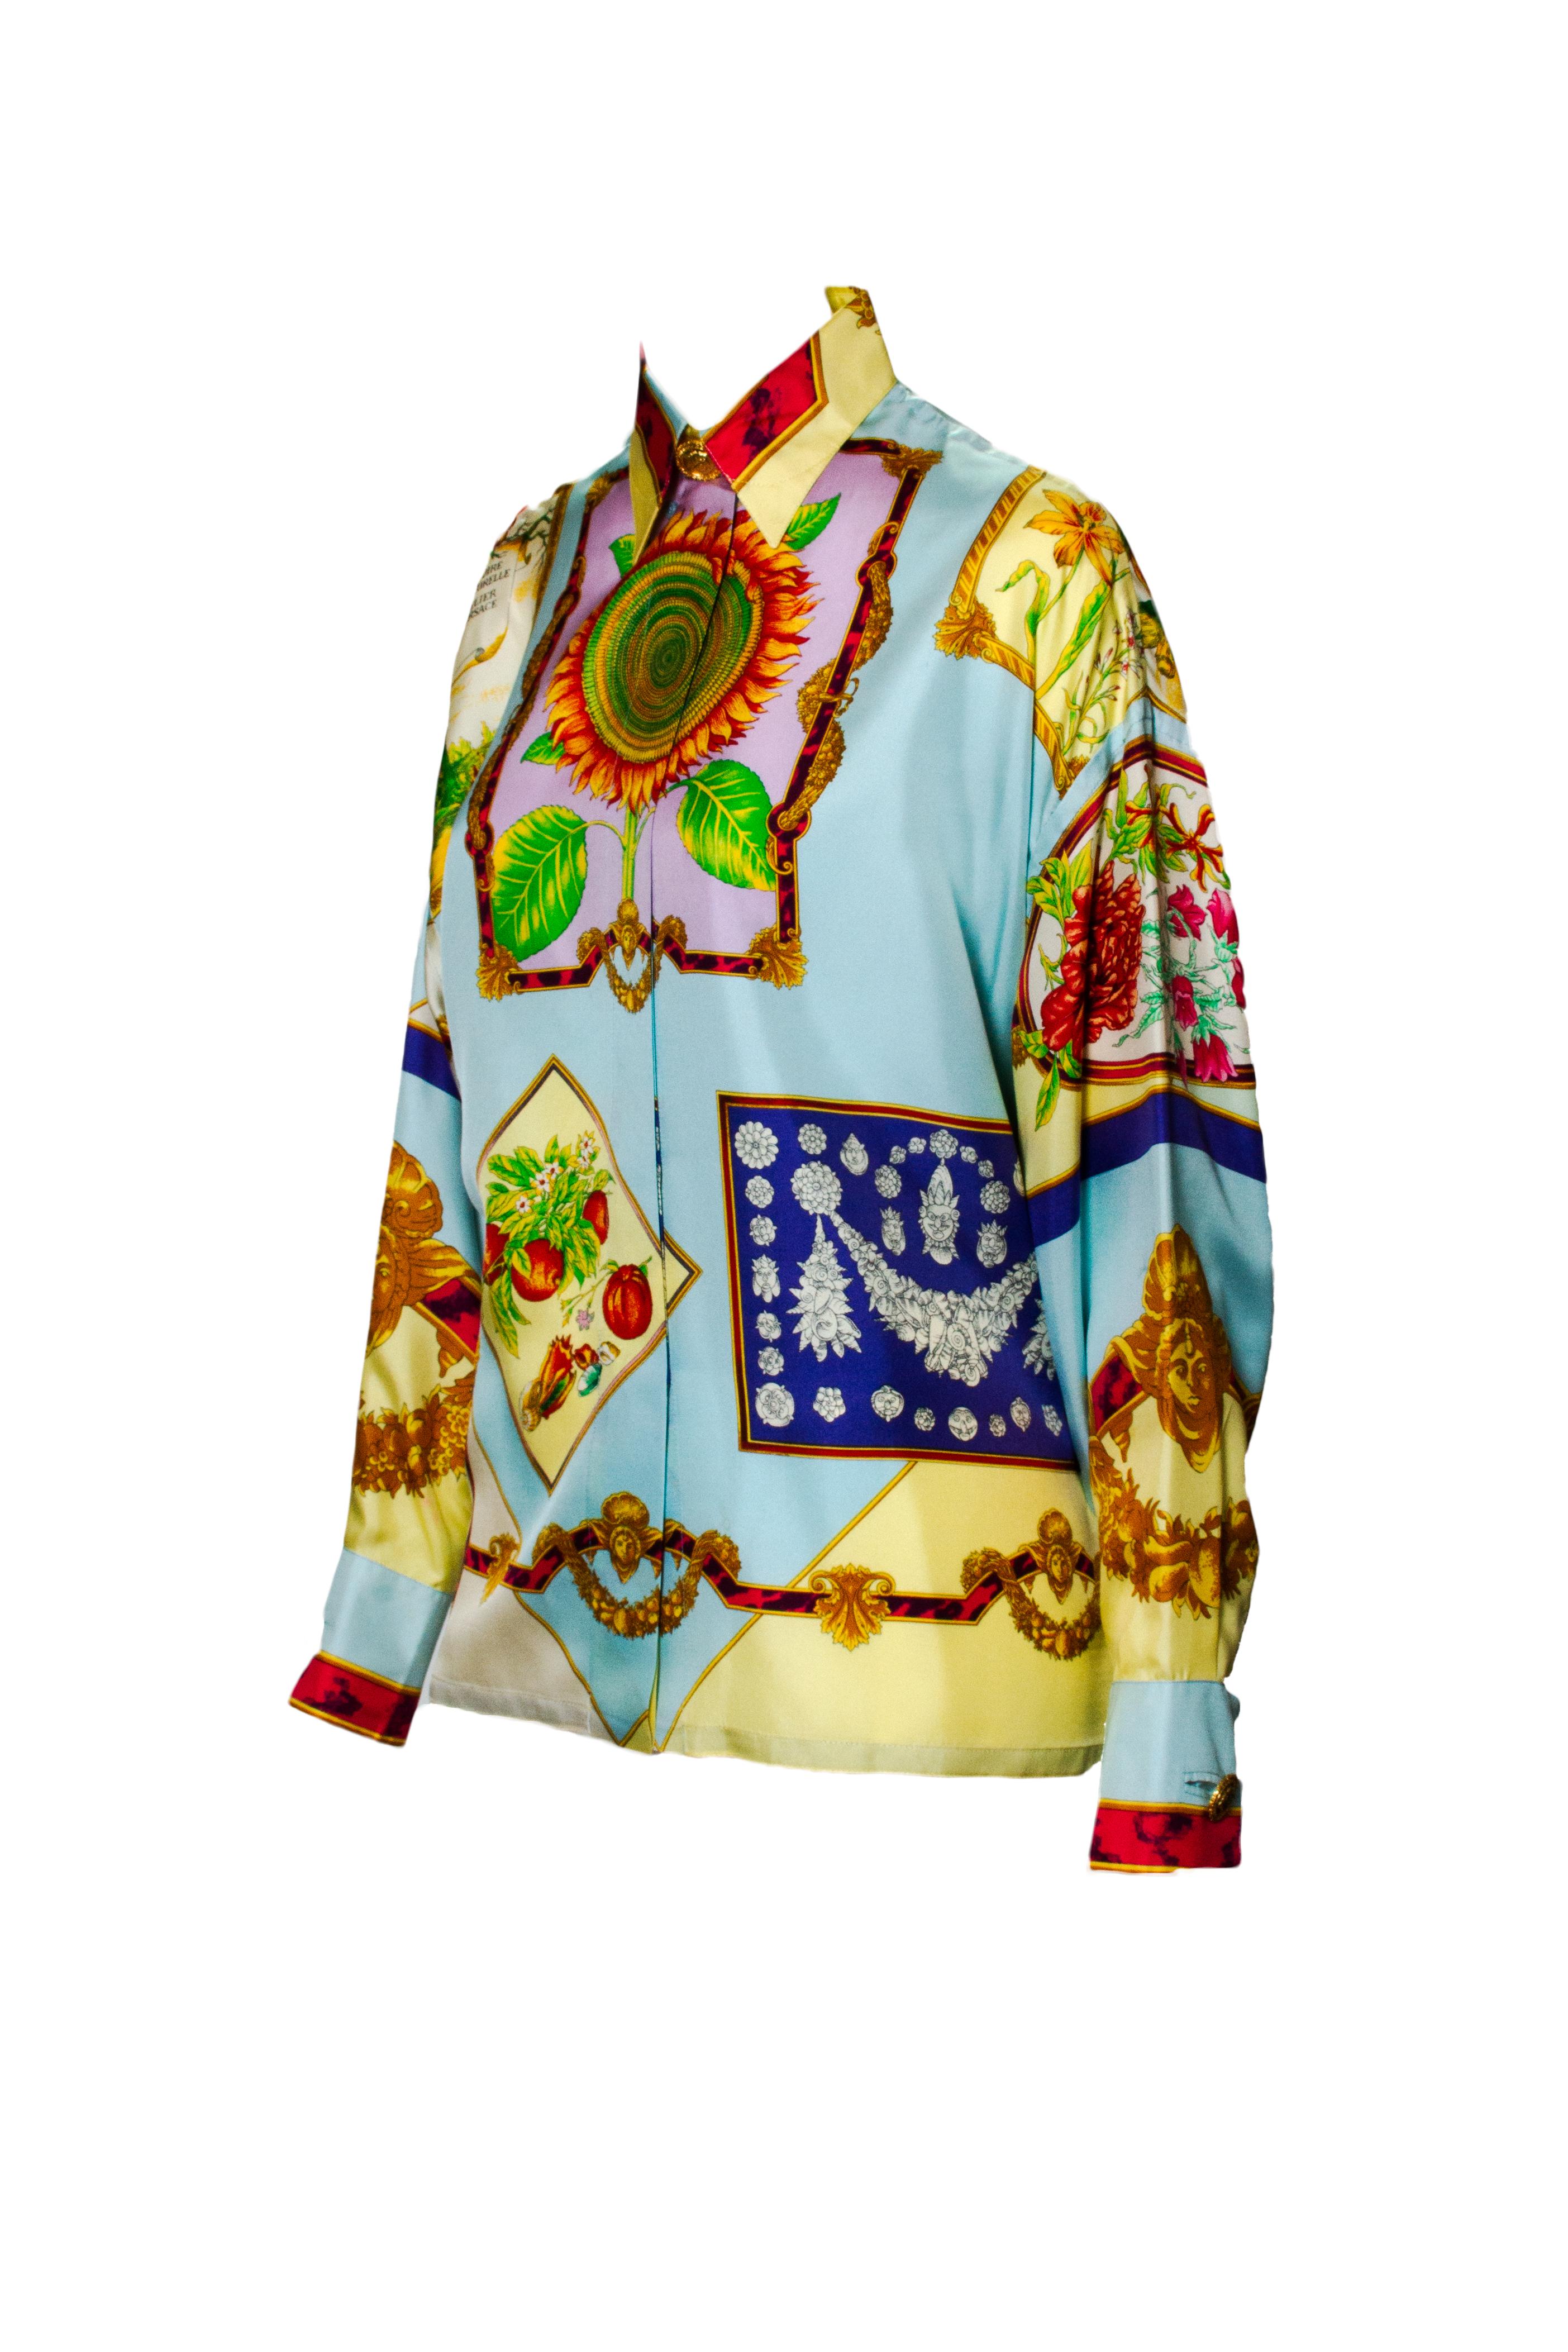 This bright silk collared shirt features an Atelier Versace original print. With large flowers on the front and back of the blouse, other images on the shirt include flora and fauna themes. The shirt additionally has a baroque theme throughout.